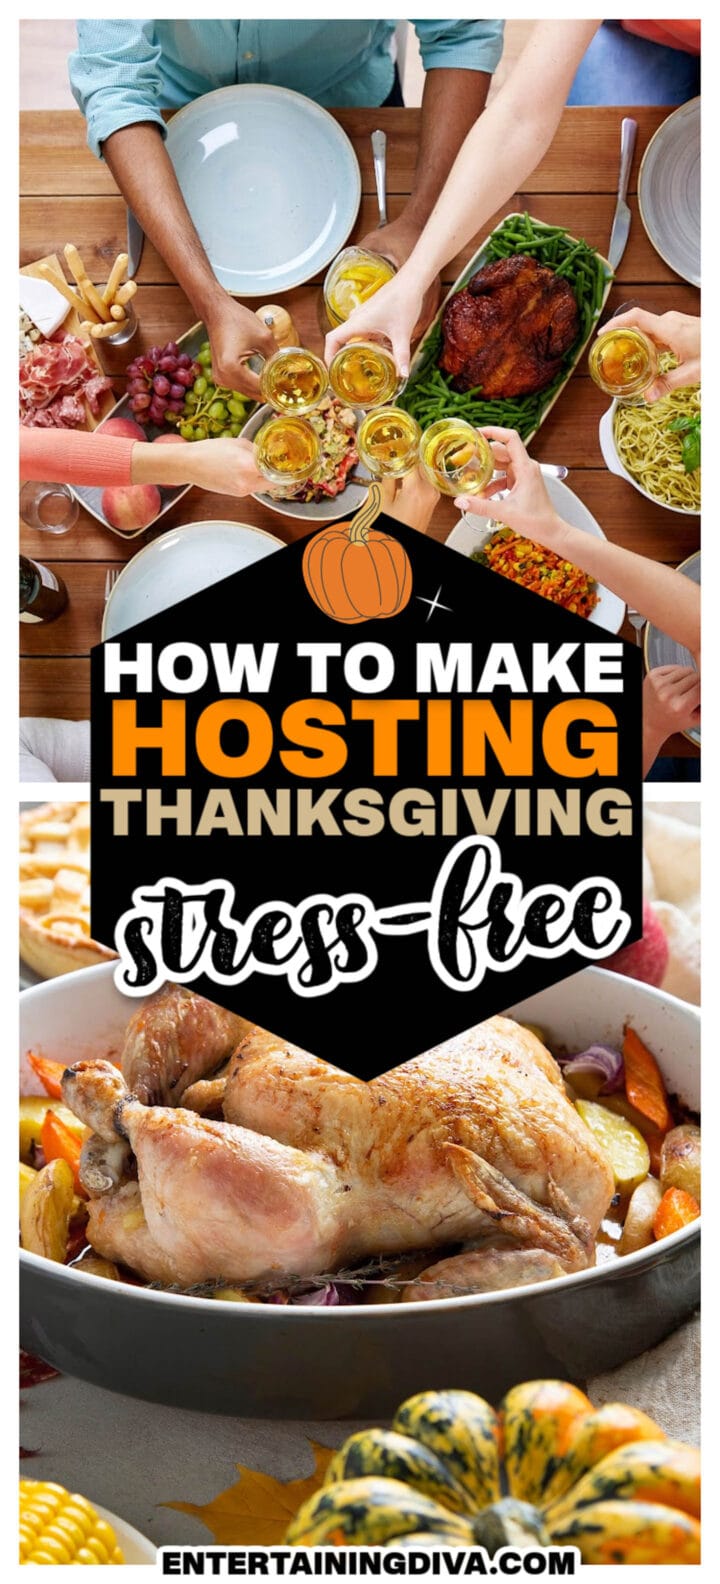 12 Thanksgiving Tips To Make Hosting This Year's Meal The Easiest Ever